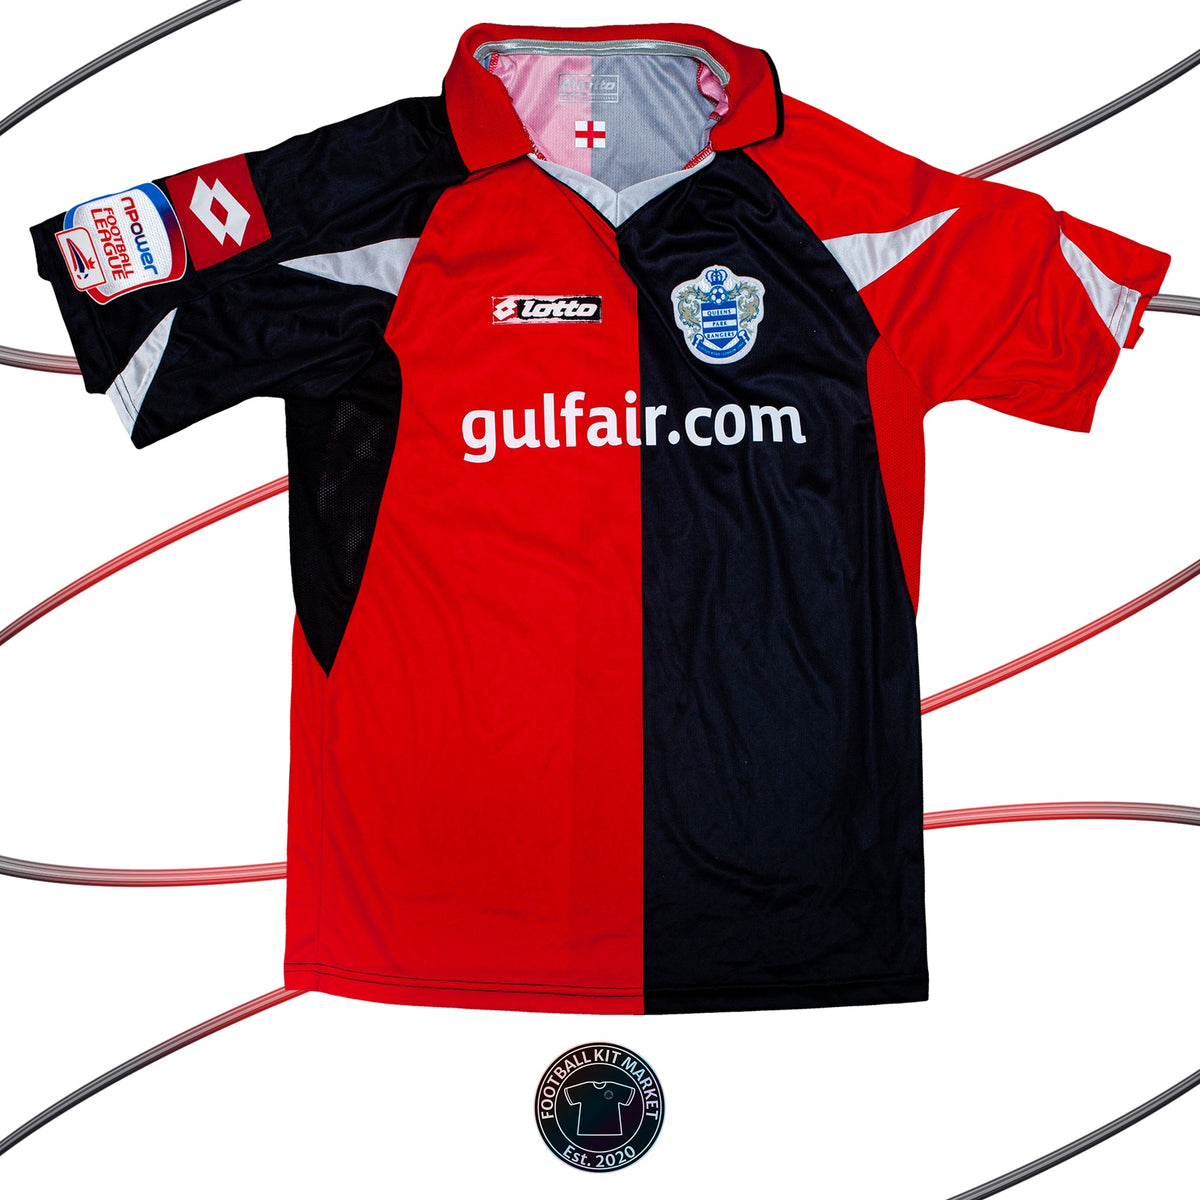 Genuine QUEENS PARK RANGERS Away Shirt PELLICORI (2010-2011) - LOTTO (XL) - Product Image from Football Kit Market